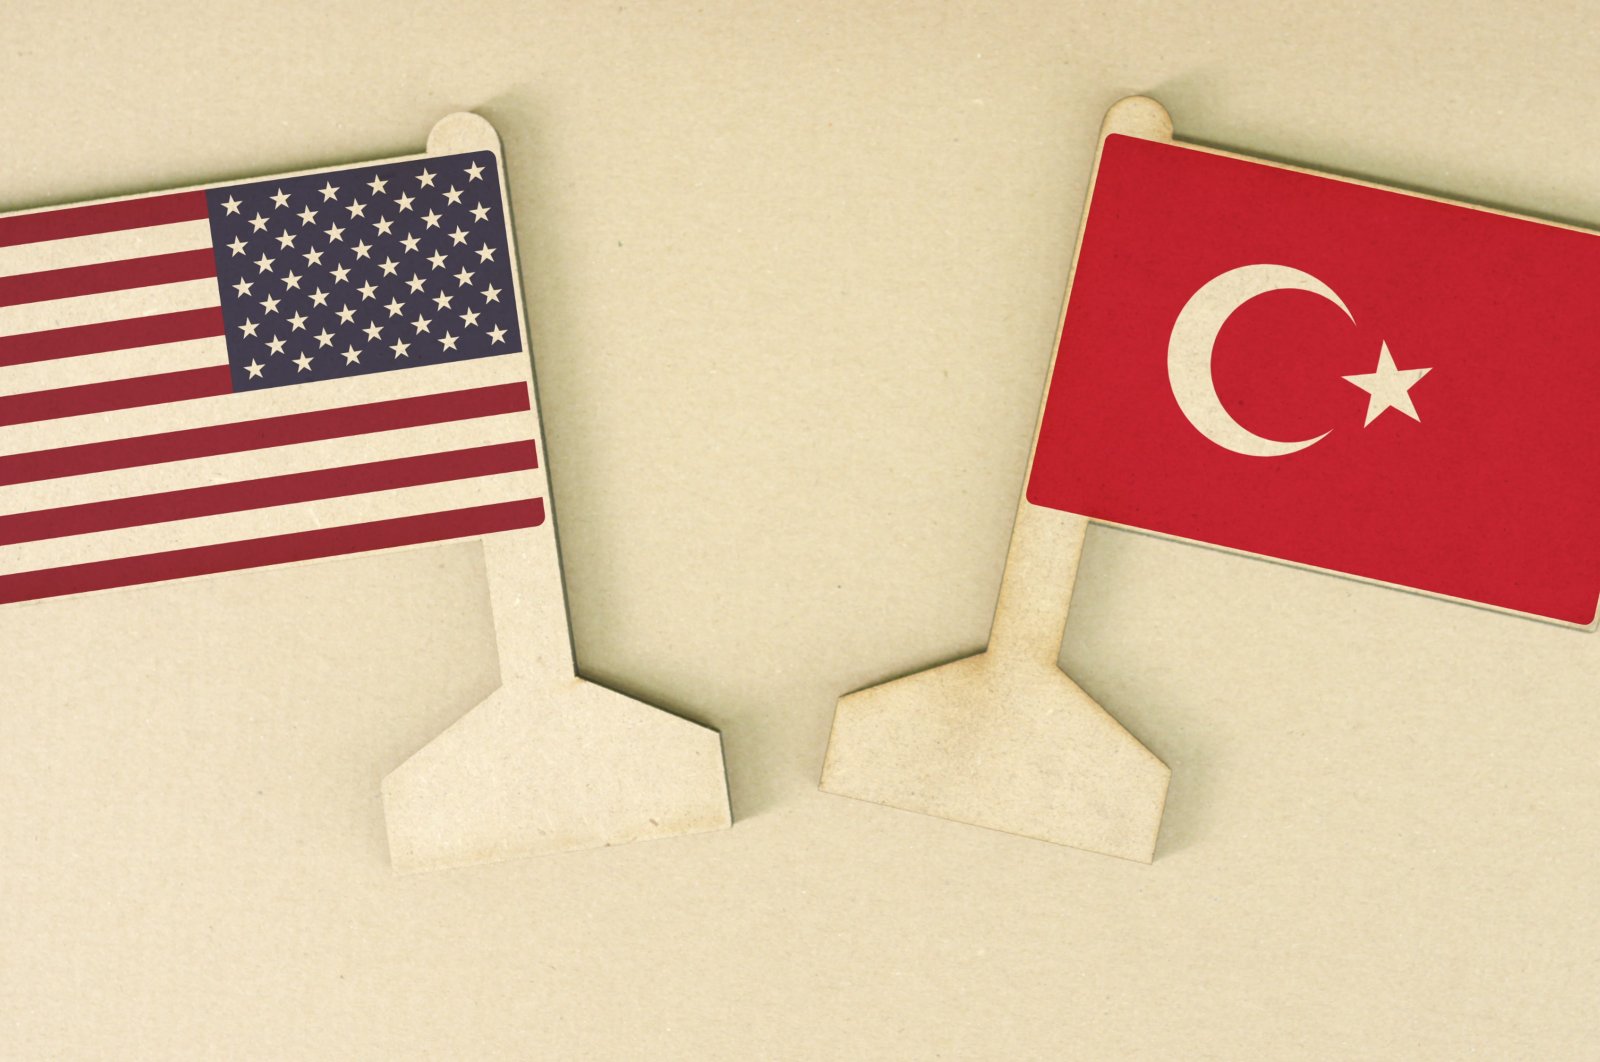 The flags of Turkey and the U.S. made of recycled paper are displayed on a cardboard desk. (Photo by Shutterstock)